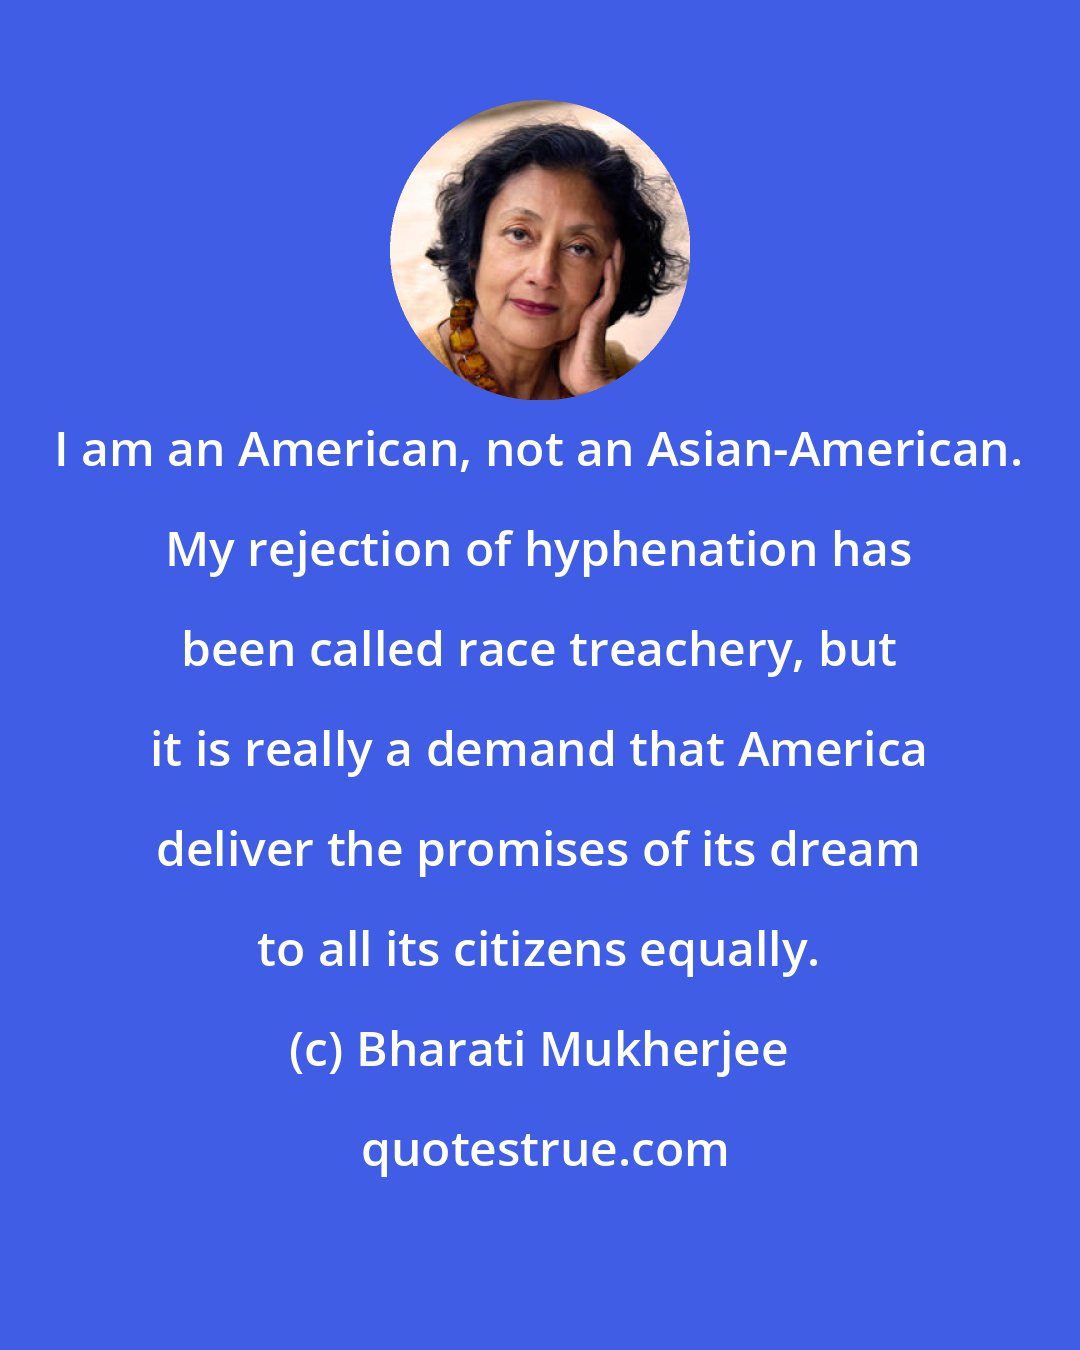 Bharati Mukherjee: I am an American, not an Asian-American. My rejection of hyphenation has been called race treachery, but it is really a demand that America deliver the promises of its dream to all its citizens equally.